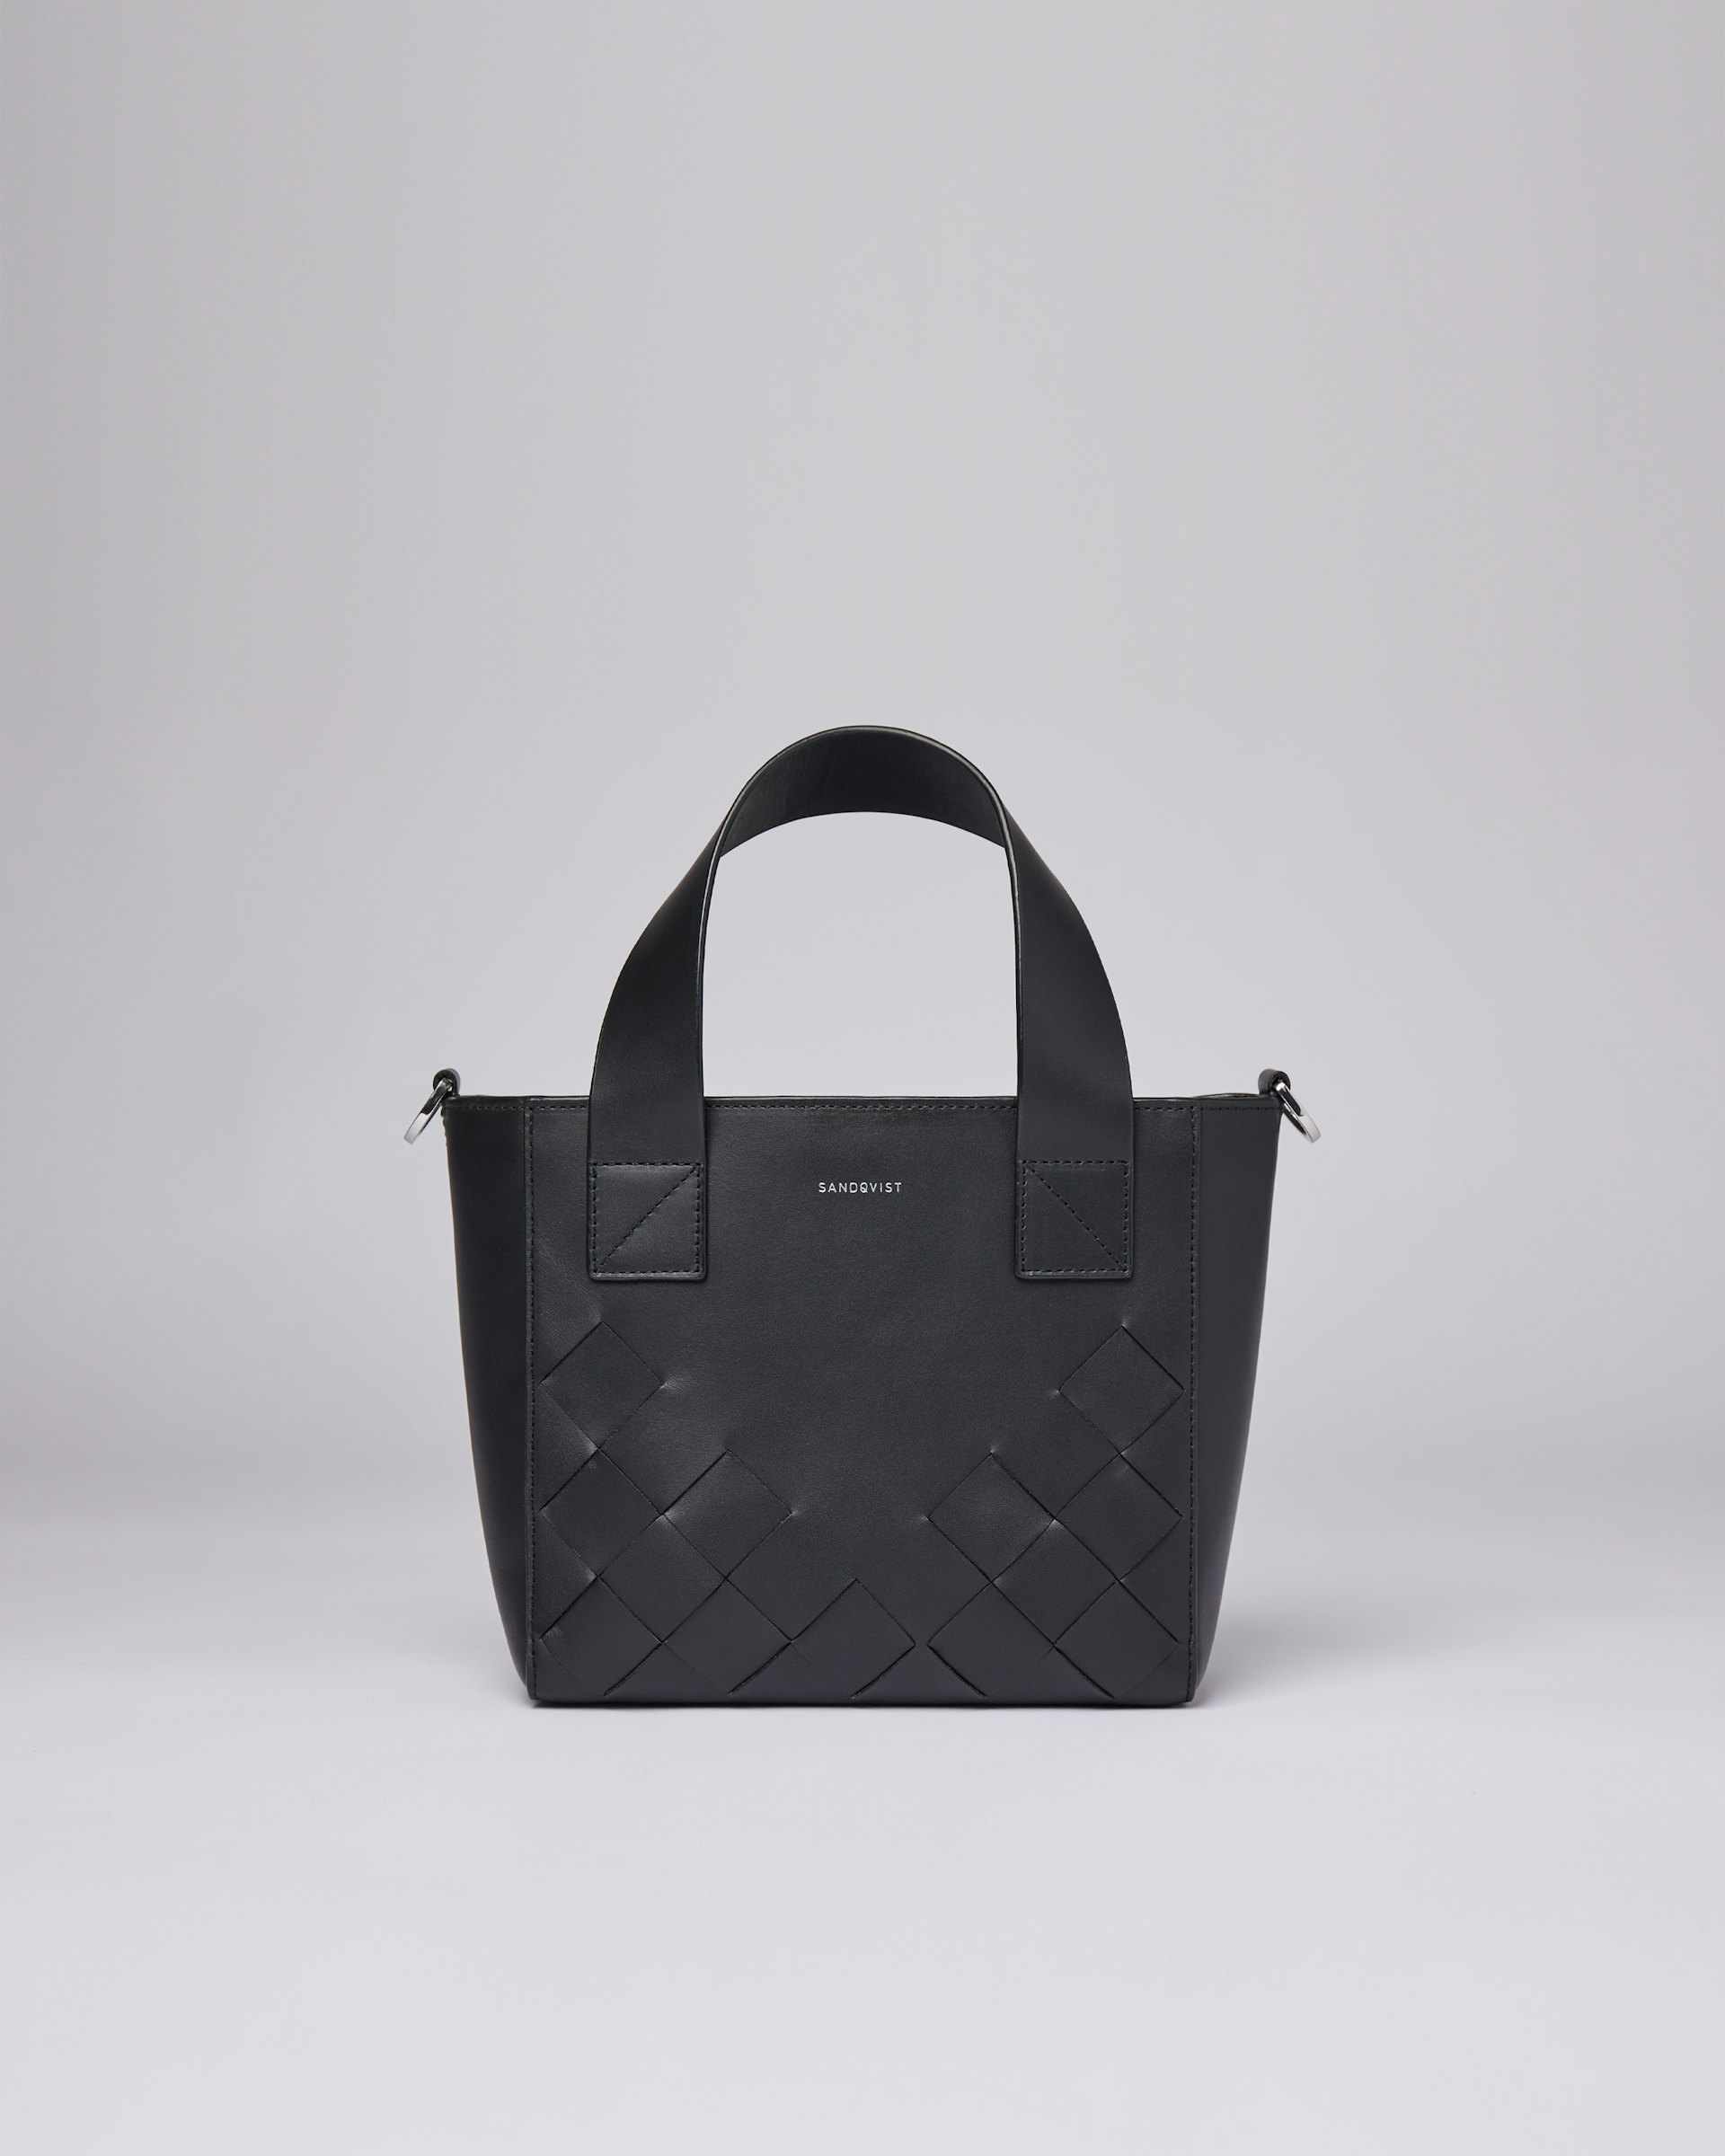 Cecilia weave belongs to the category Shoulder bags and is in color black